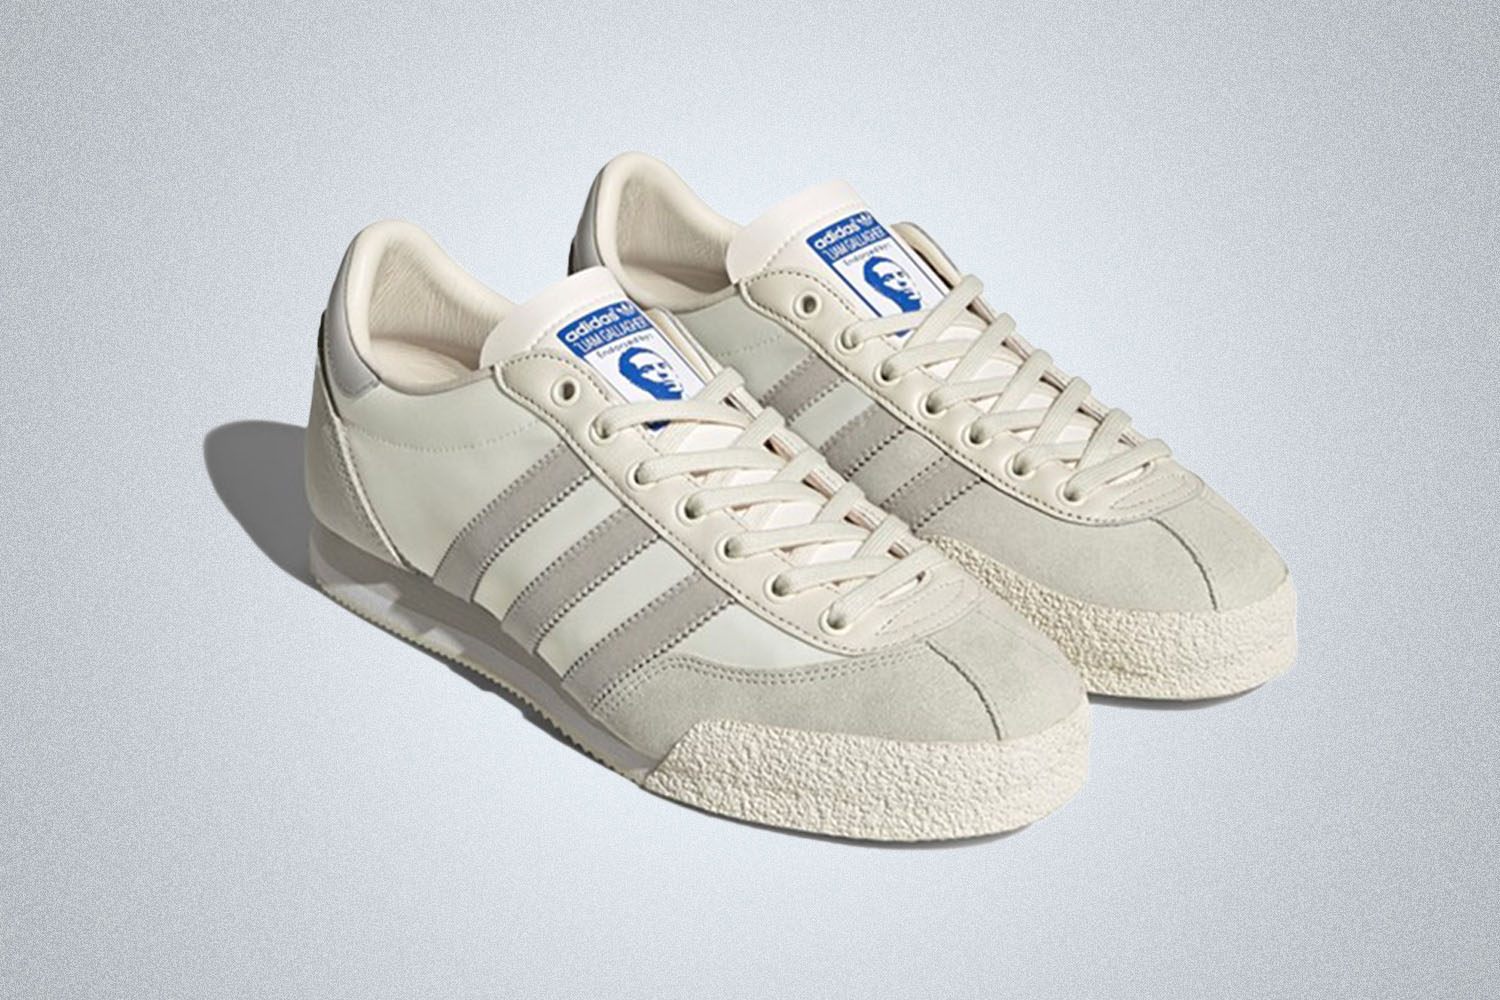 a pair of white adidas trainers in collaboration with Liam Gallagher on a grey background